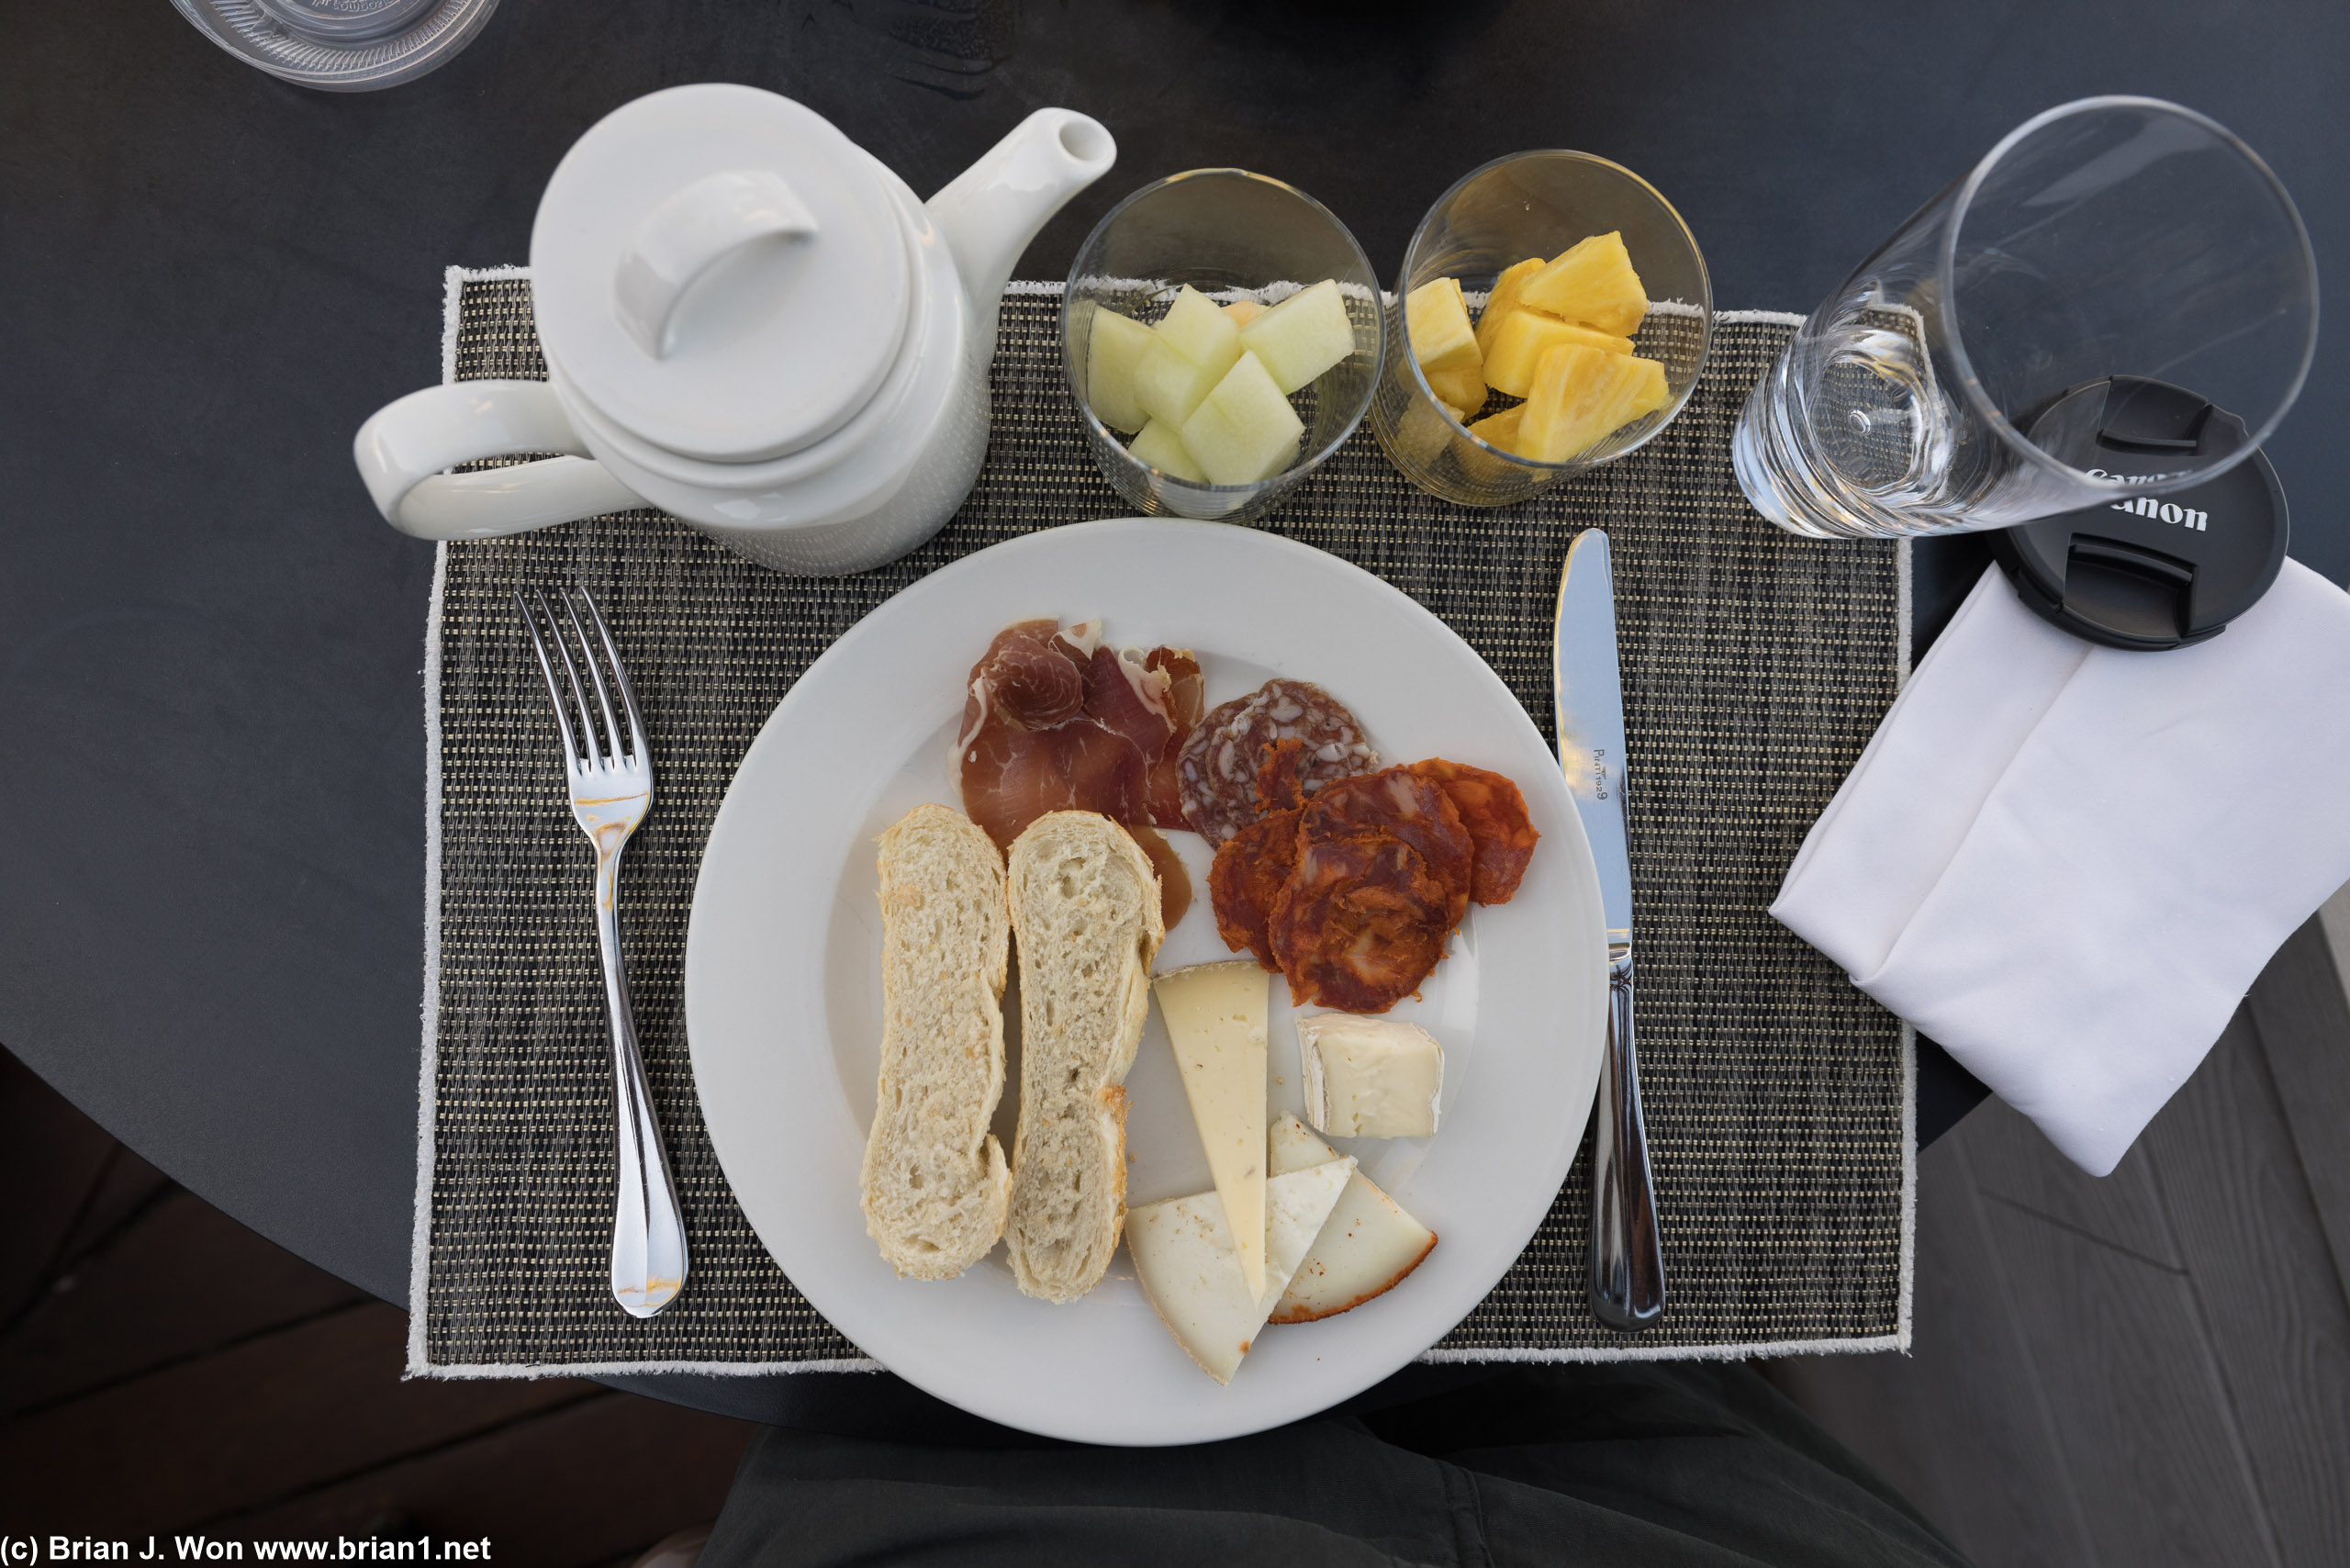 Meat, cheese, bread, fruit, and tea.